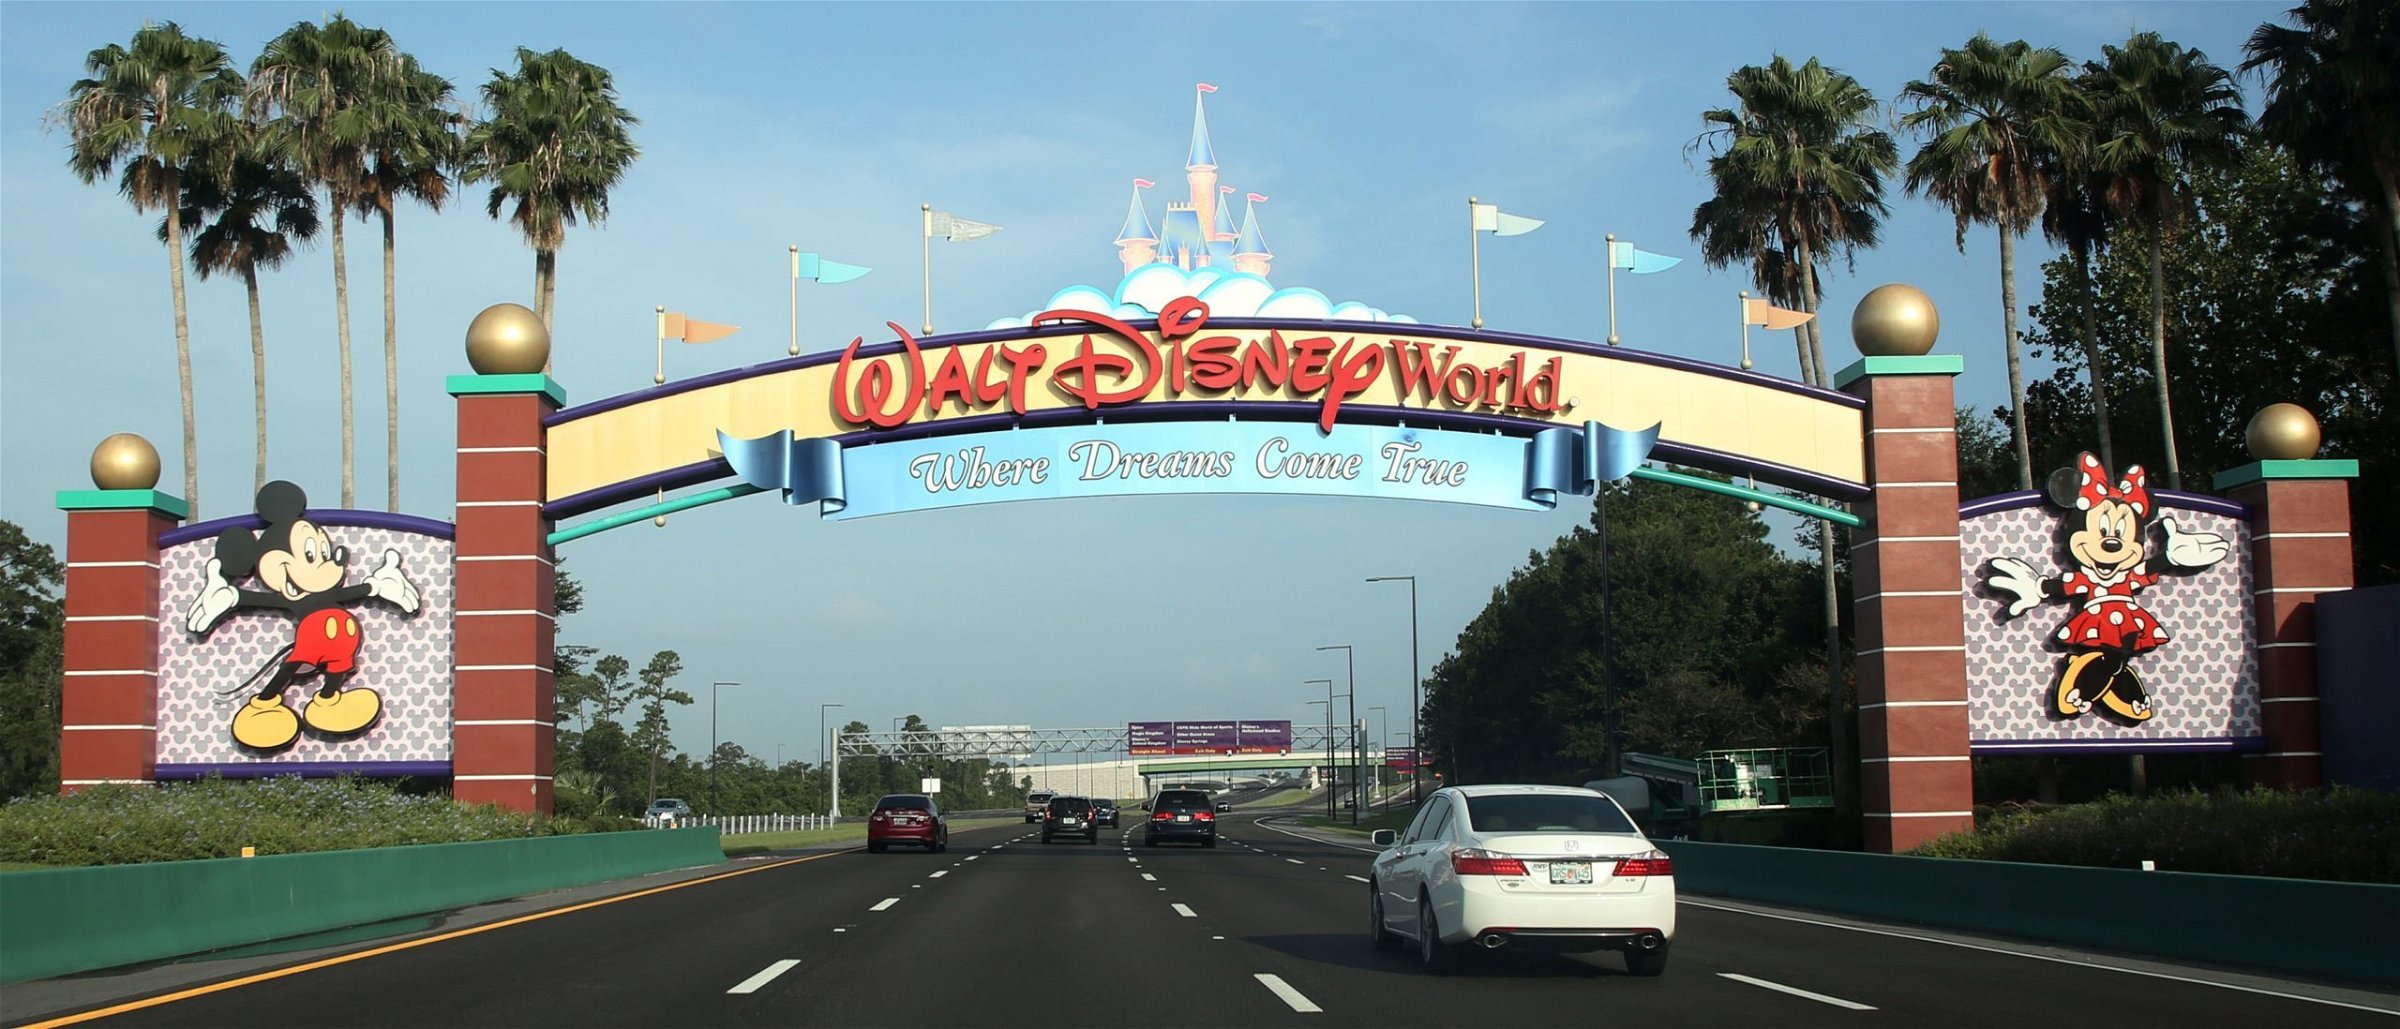 Visitors drive past a sign welcoming them to Walt Disney World on the first day of reopening of the iconic Magic Kingdom. (Photo by GREGG NEWTON/Gregg Newton/AFP via Getty Images)